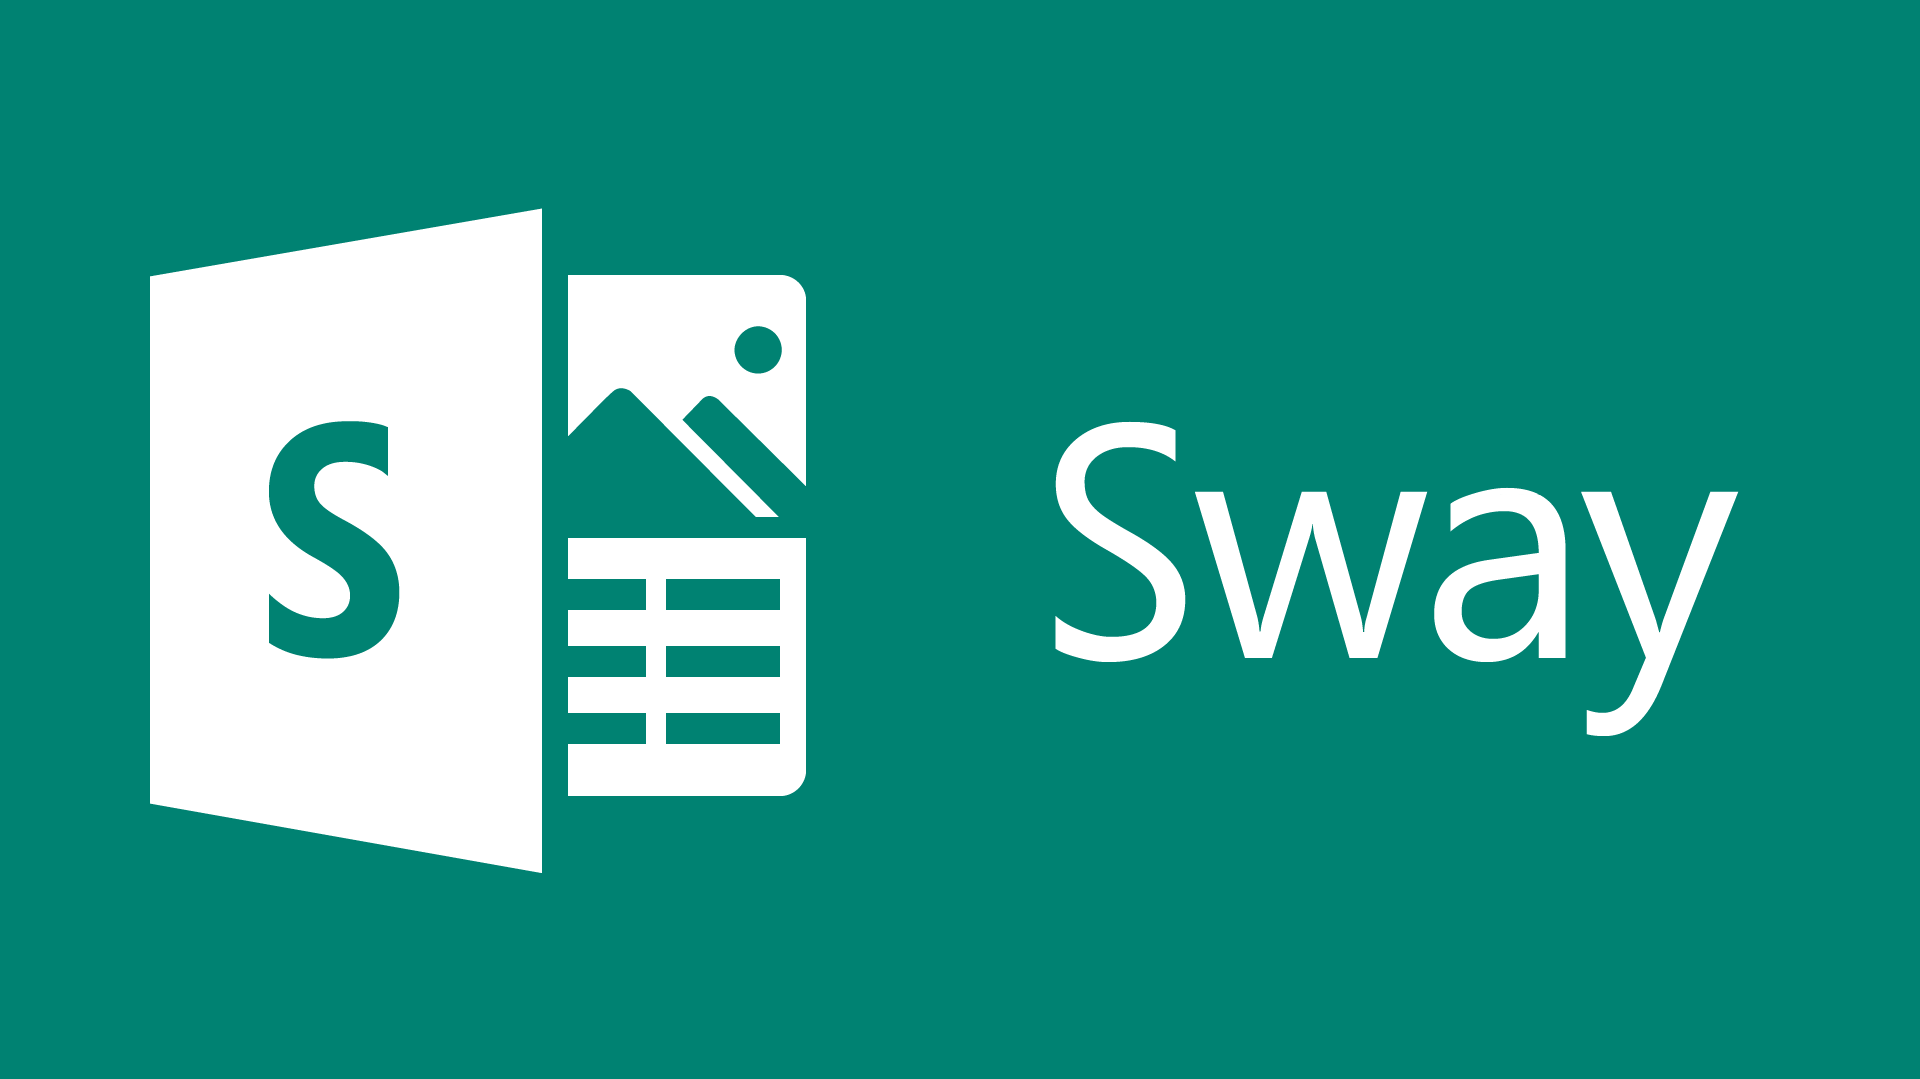 Microsoft Sway Logo - Using Sway: The New Office 365 App